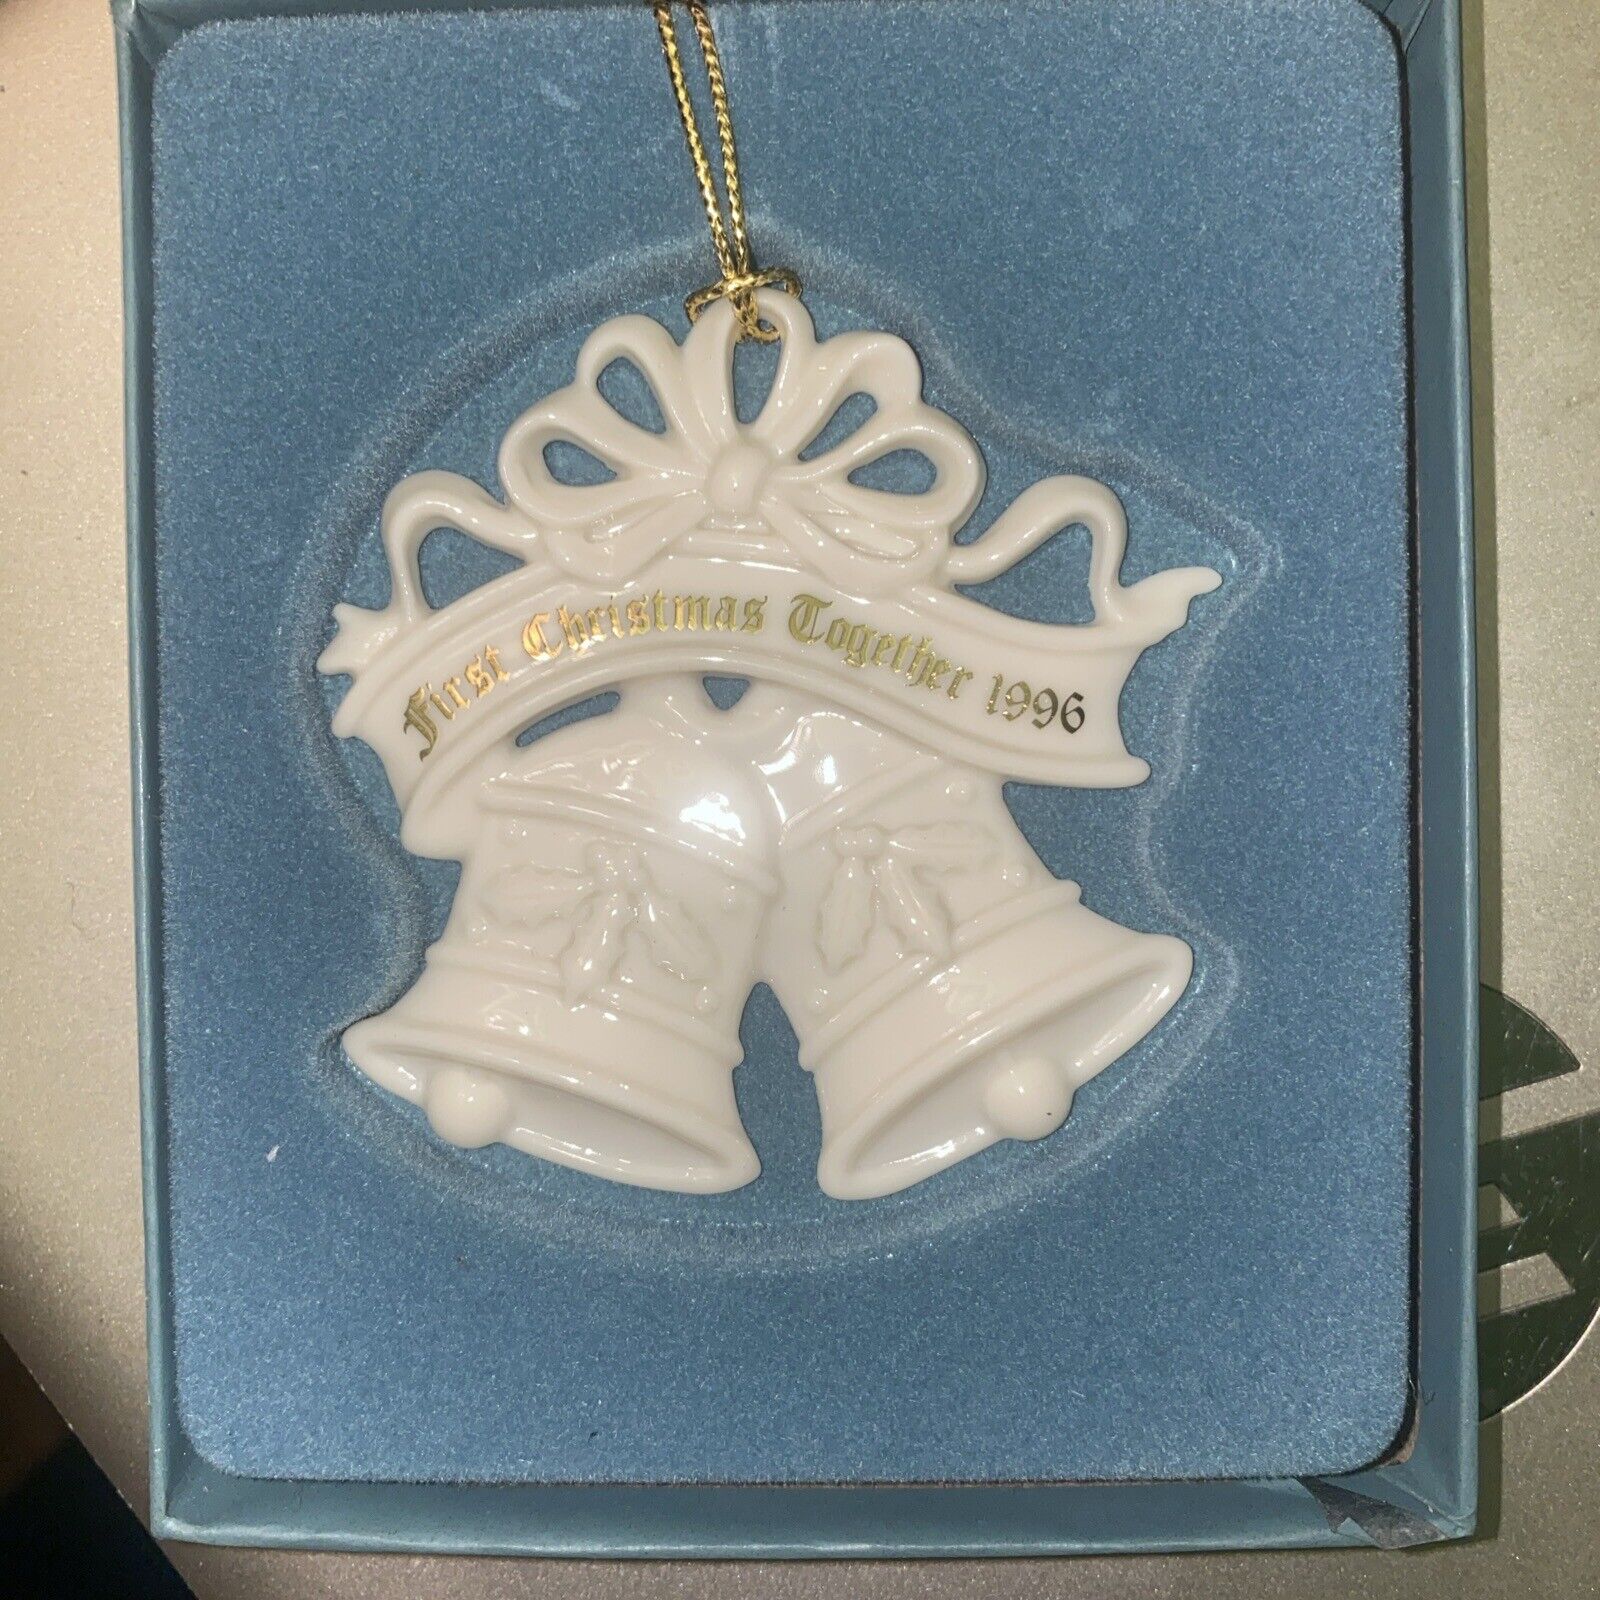 Lenox First Christmas Together 1996 Ornament Brand New